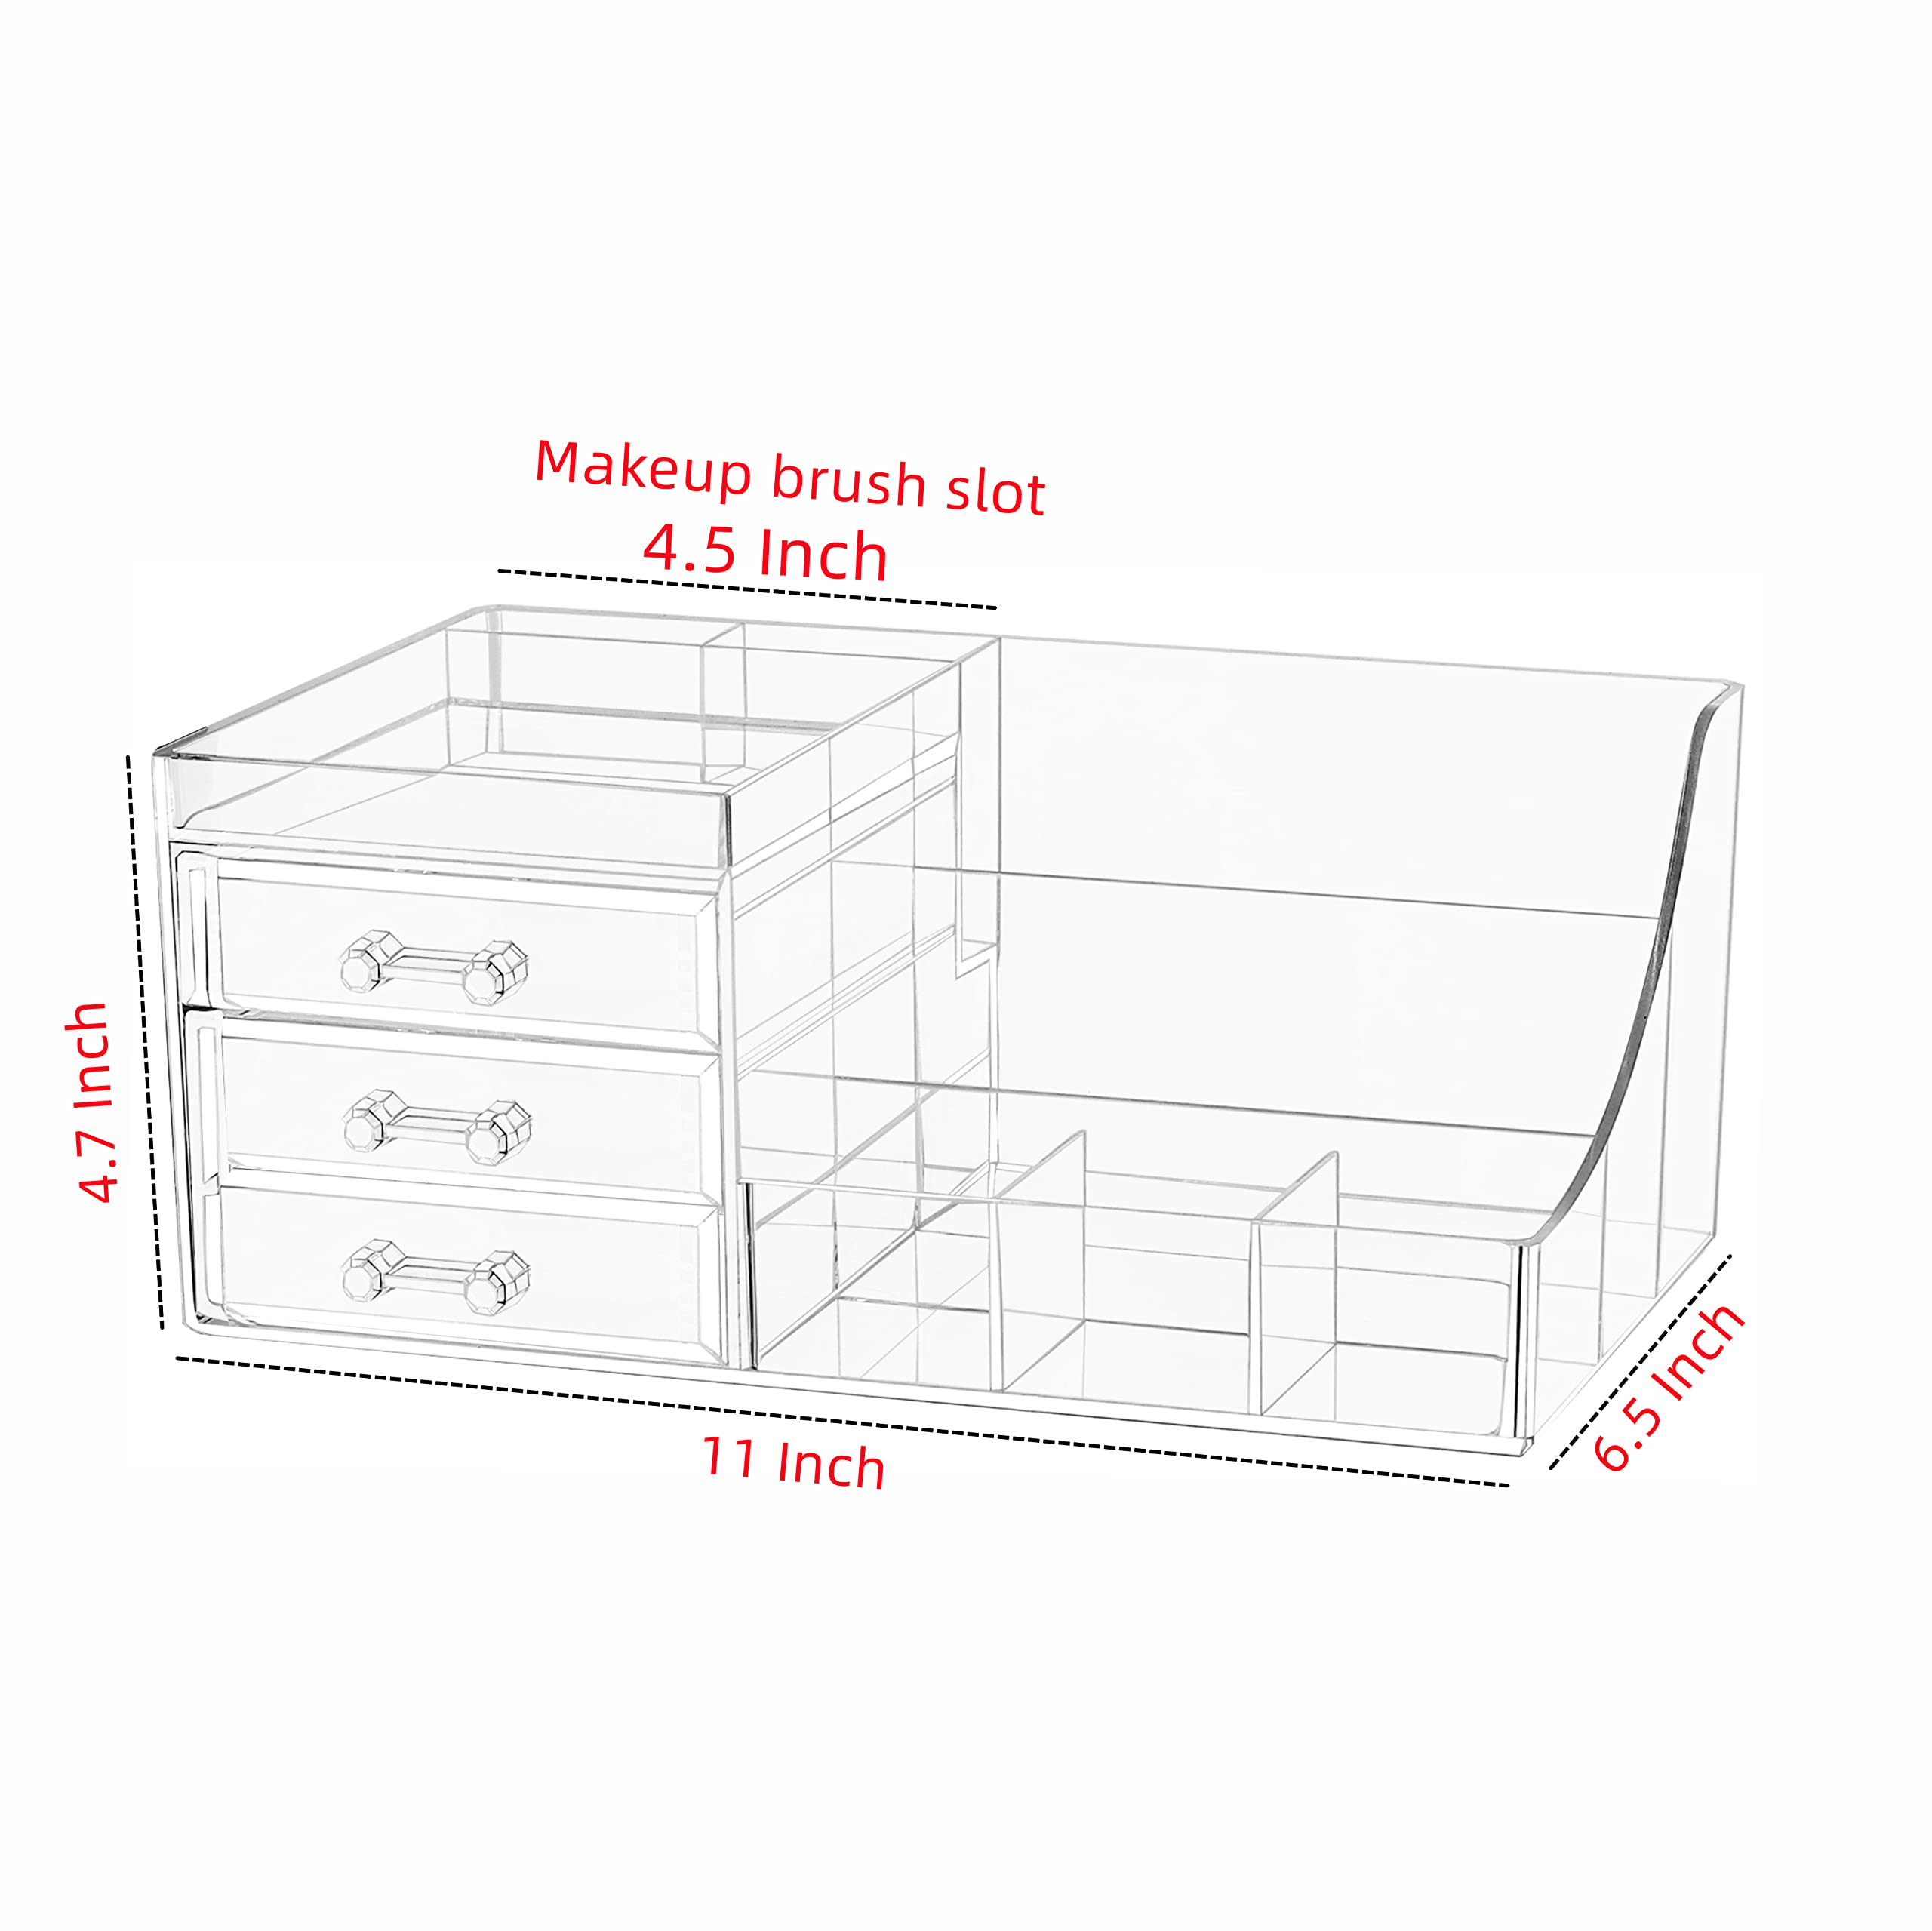 Cq acrylic Stackable Makeup Organizer With 3 Drawers,Acrylic Bathroom Organizers Storage,Clear Storage Bins for Lipstick,Brushes,Lotions,Eyeshadow,Nail Polish and Jewelry